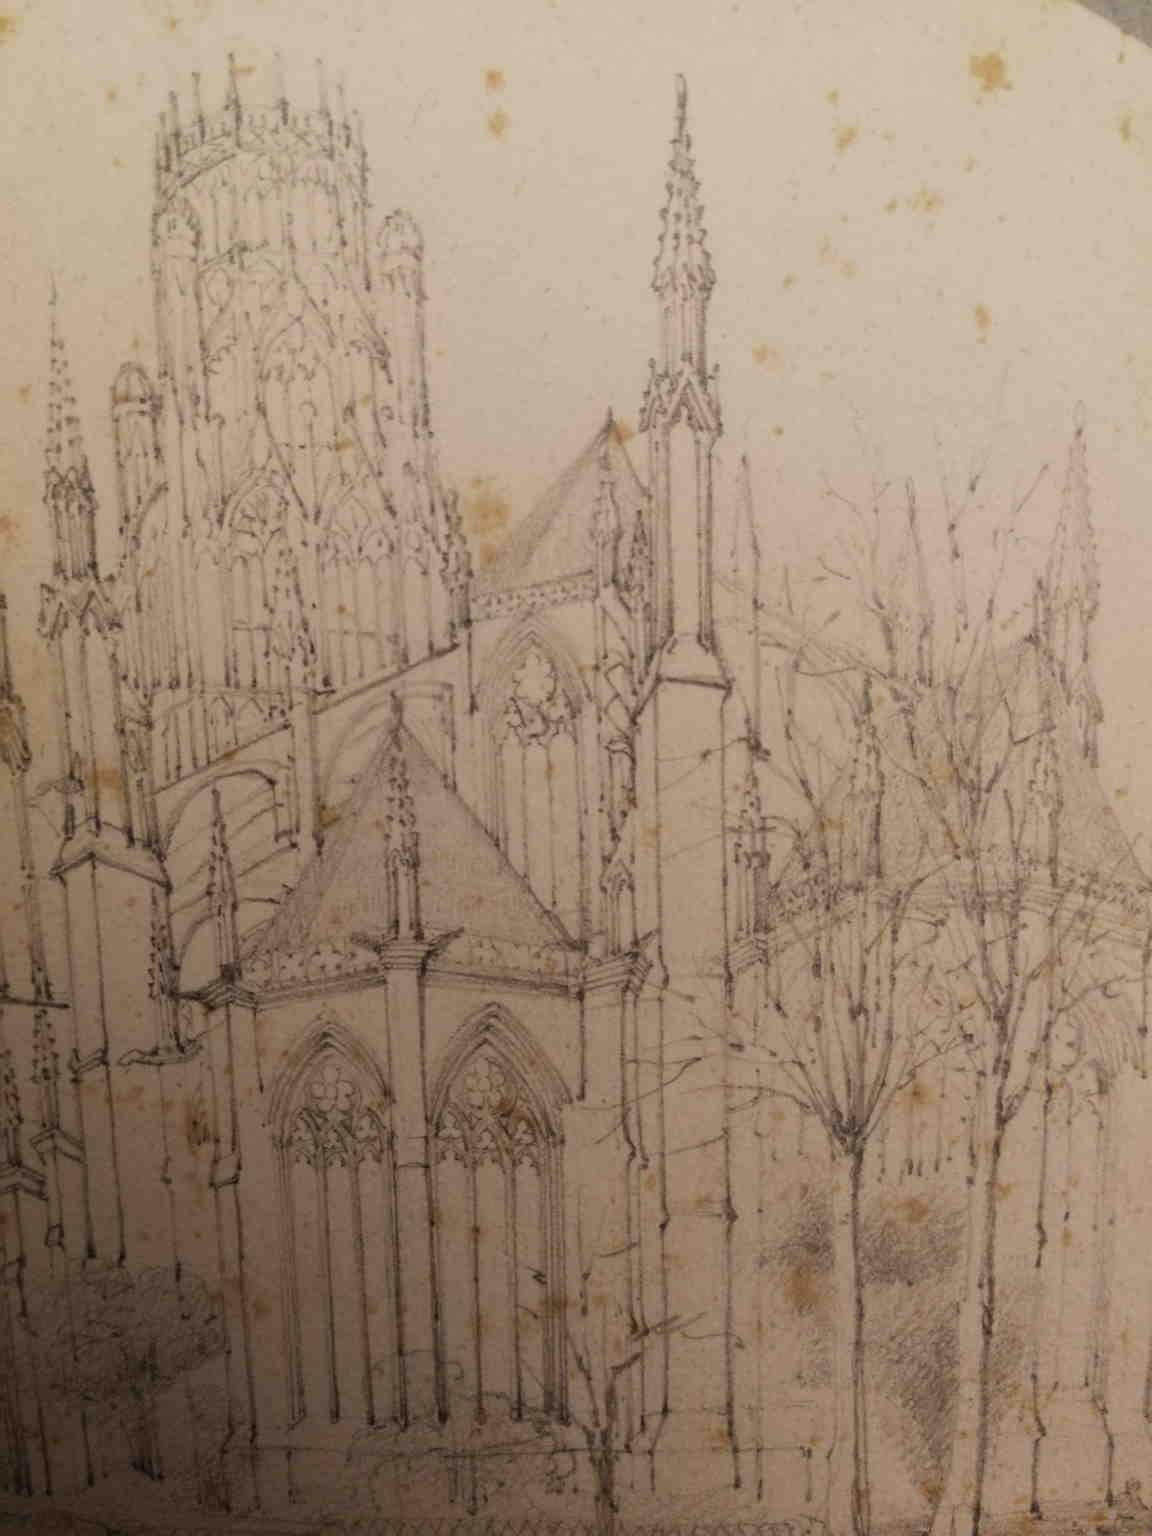 French Abbey Rouen Landscape Drawing 19 century pencil paper - Other Art Style Art by Unknown